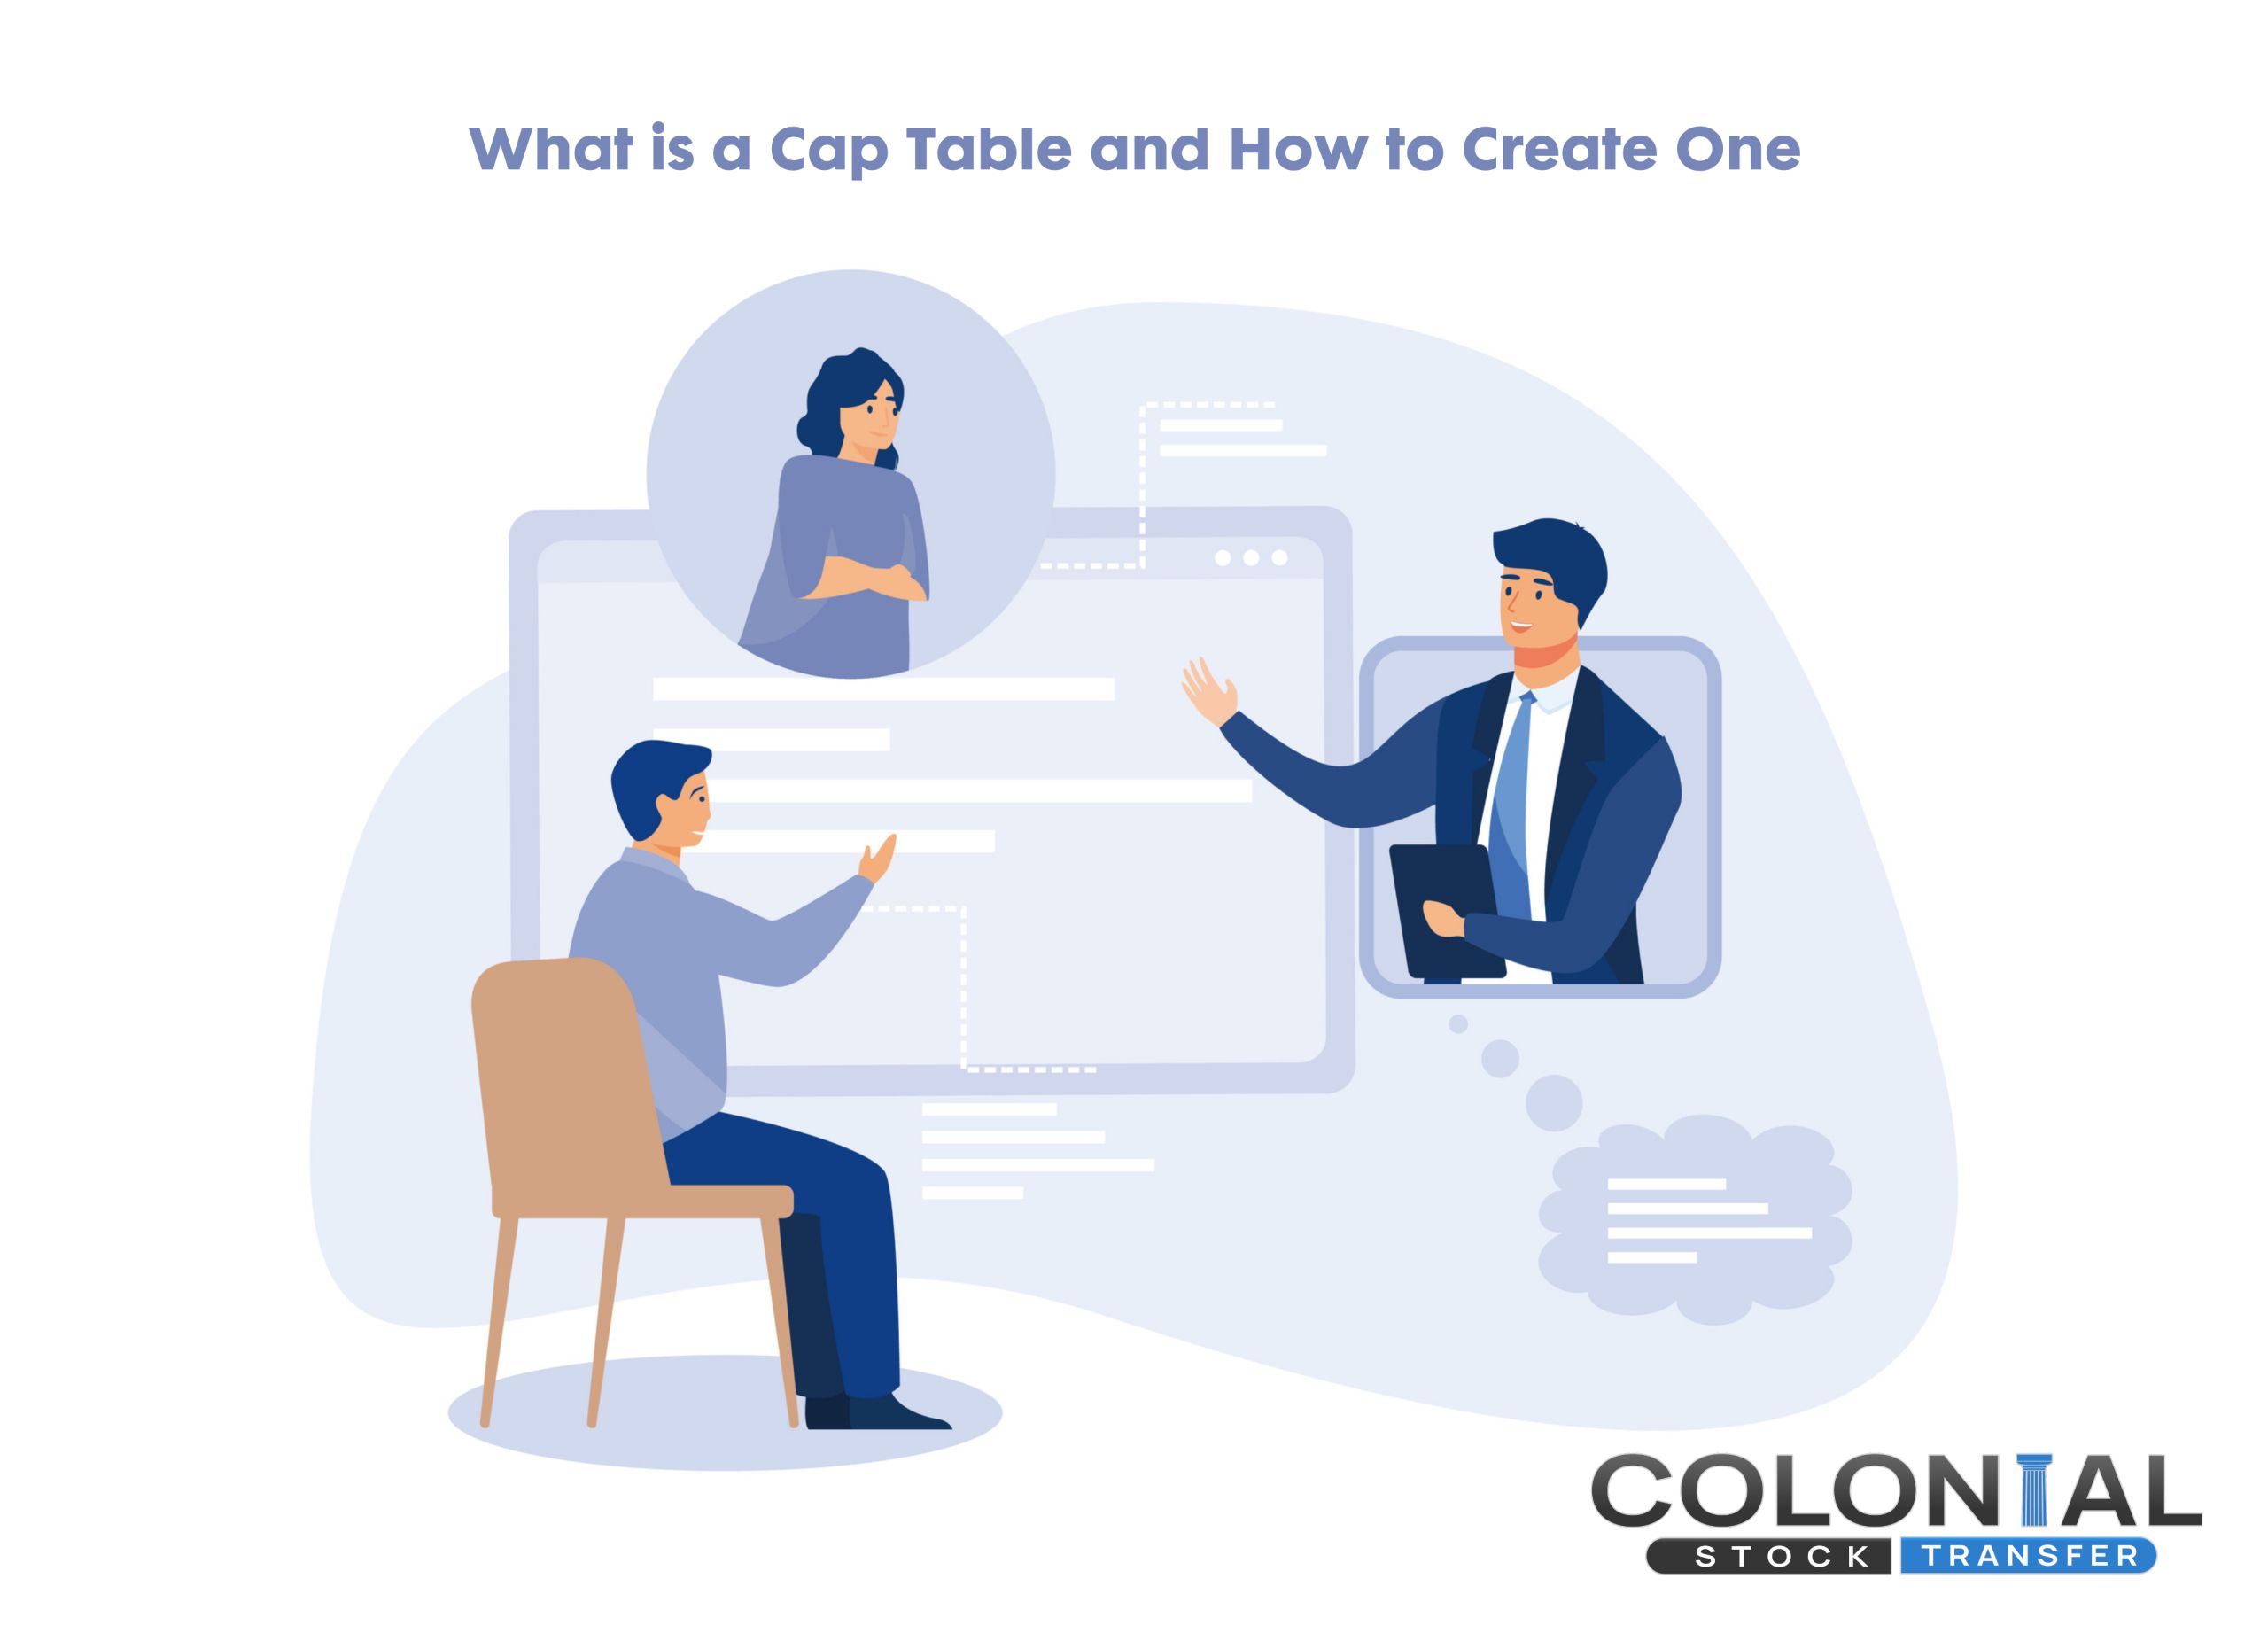 What is a Cap Table and How to Create One